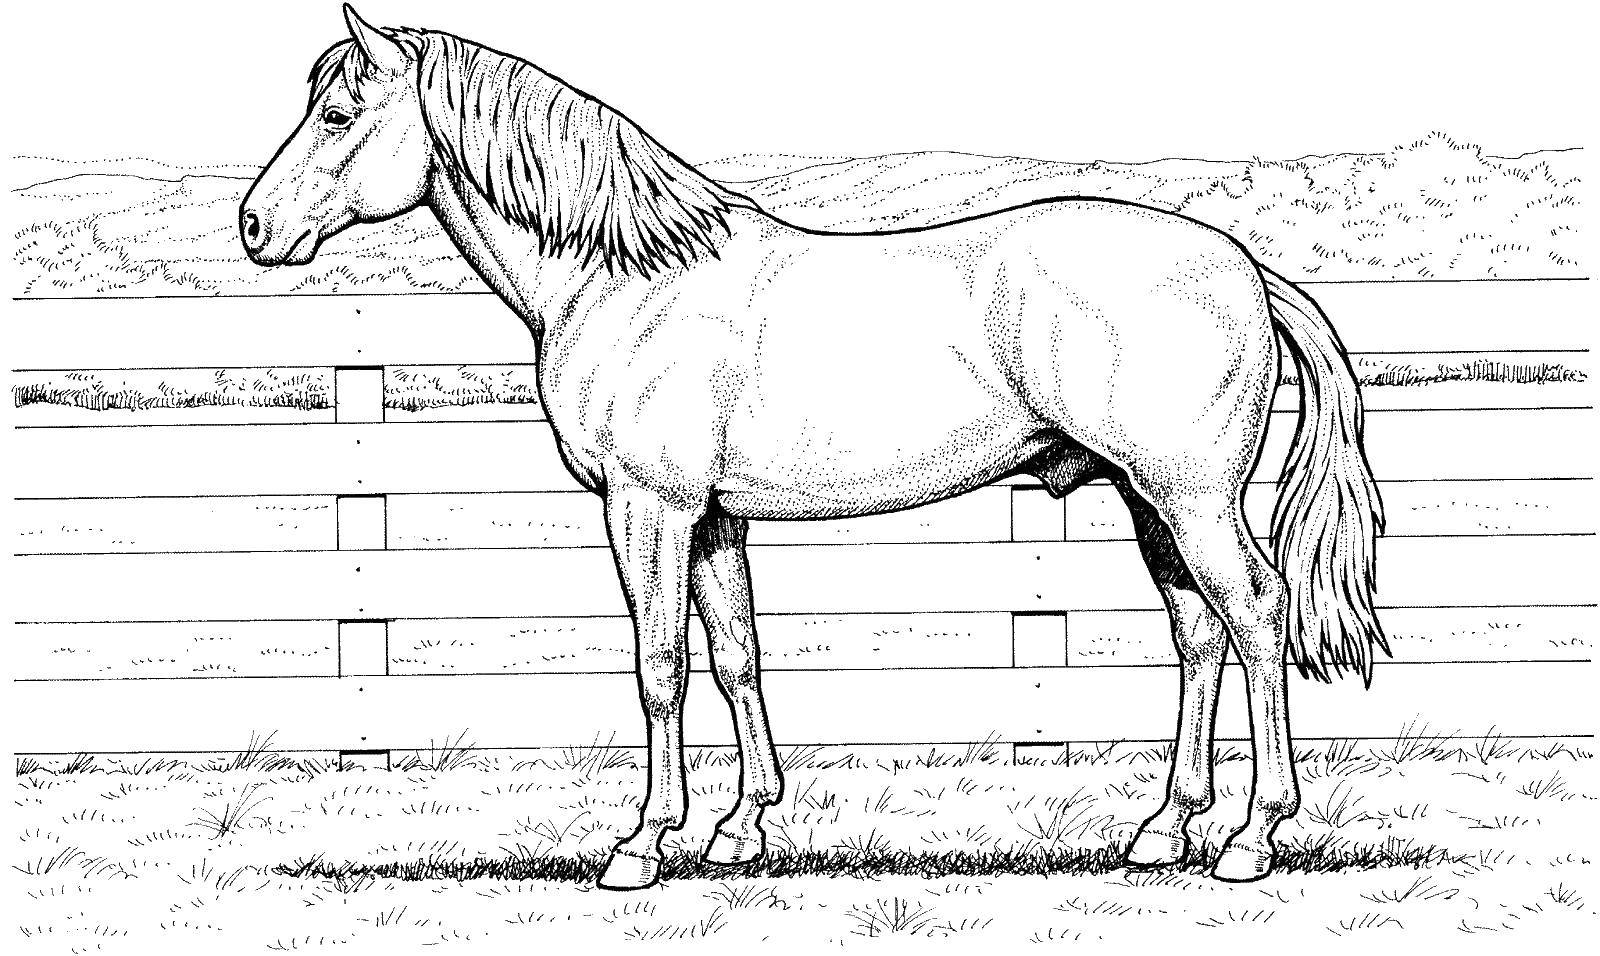 Coloring The horse and corral. Category horse. Tags:  horse fence, corral.